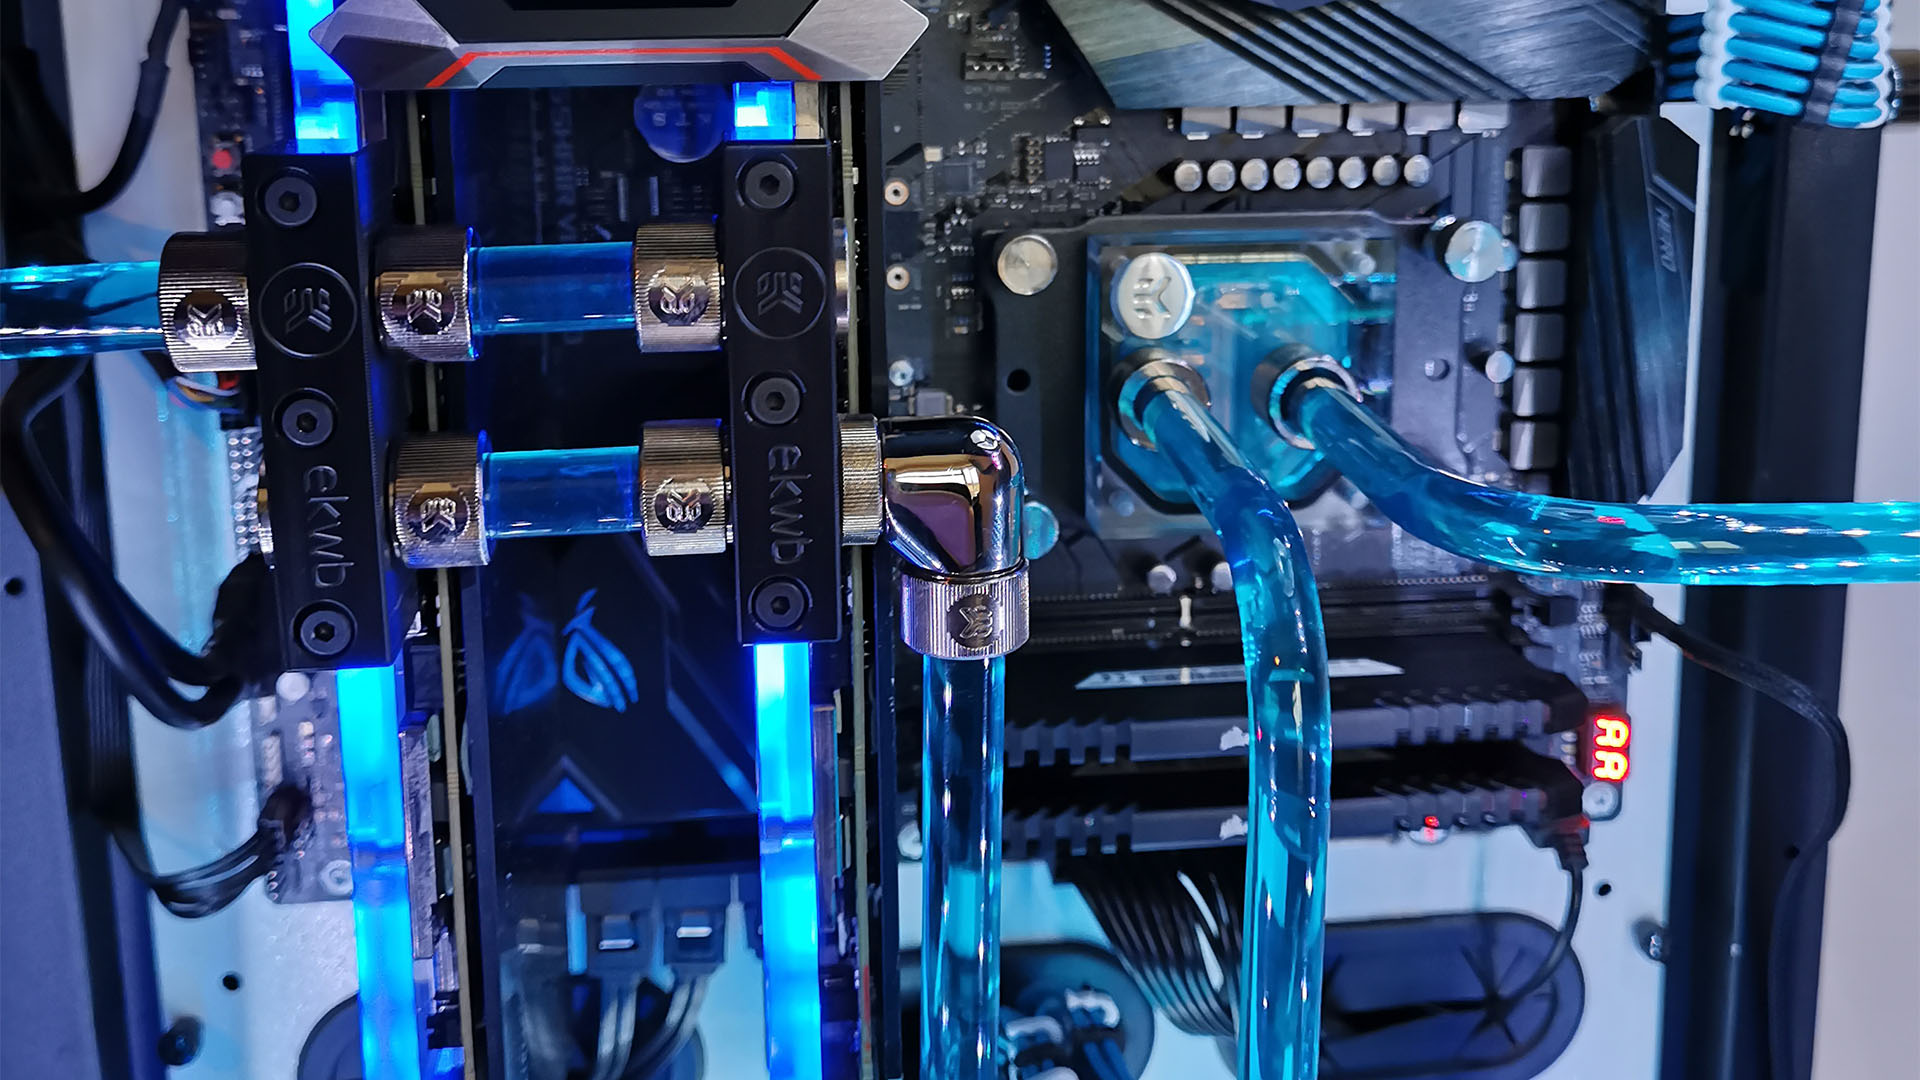 The Thermaltake Tower 900 case with full watercooling inside with blue coolant